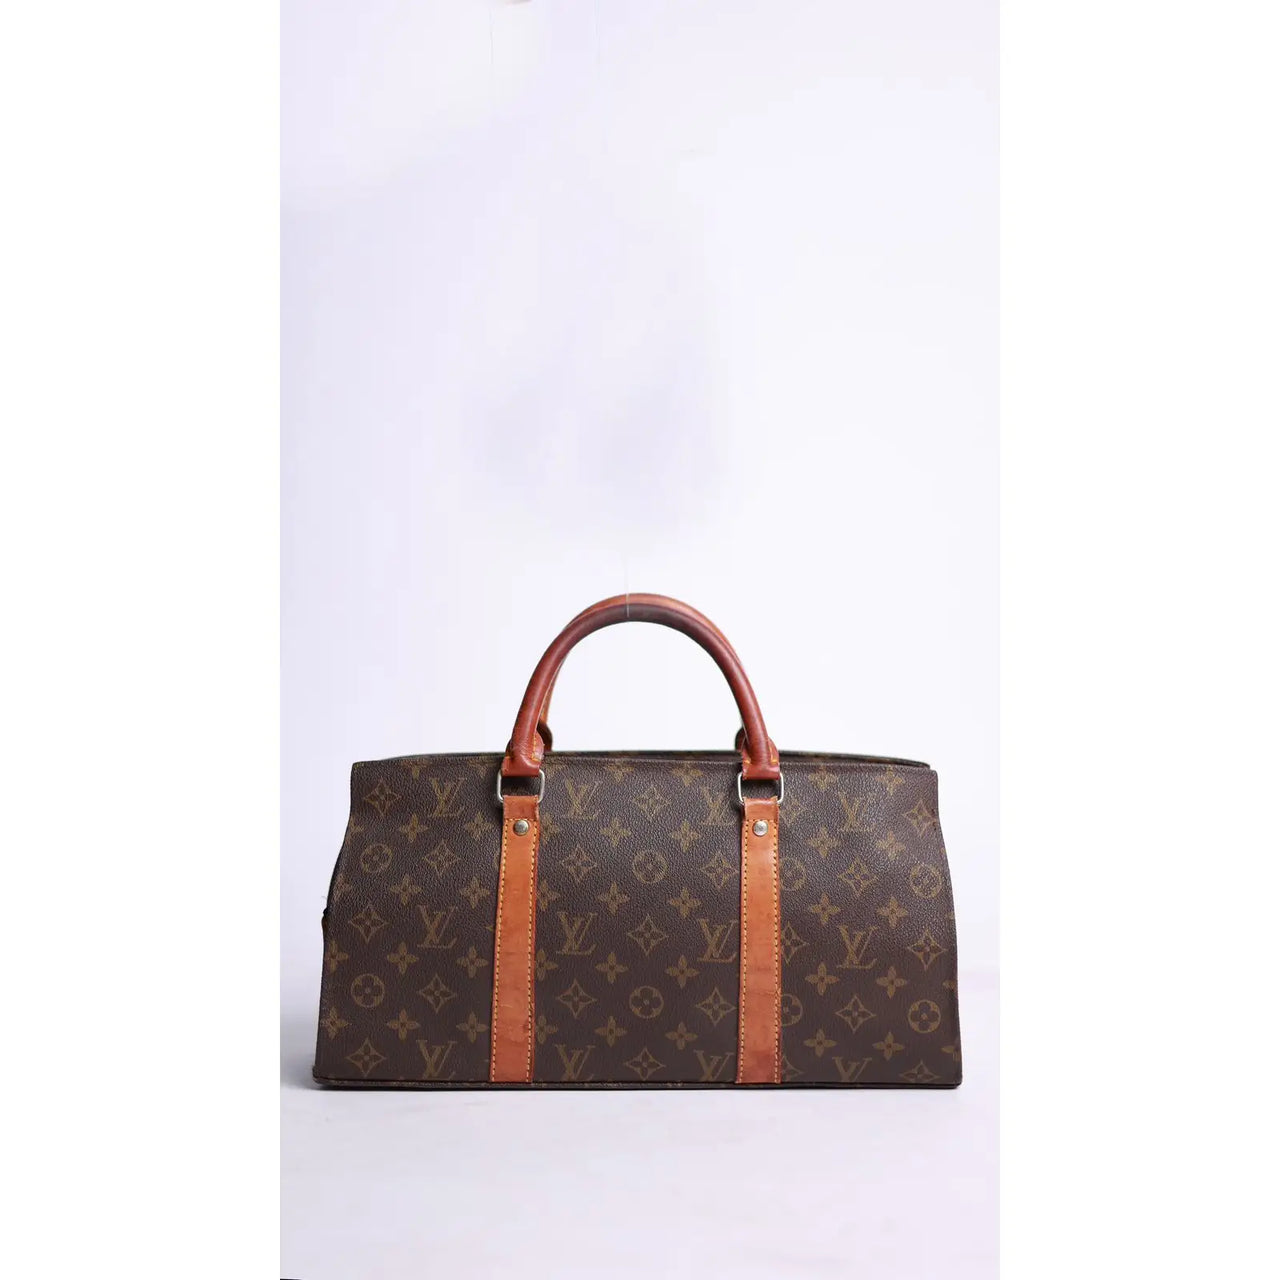 Louis Vuitton, Bags, To Offset Cost Of New Lv Bag